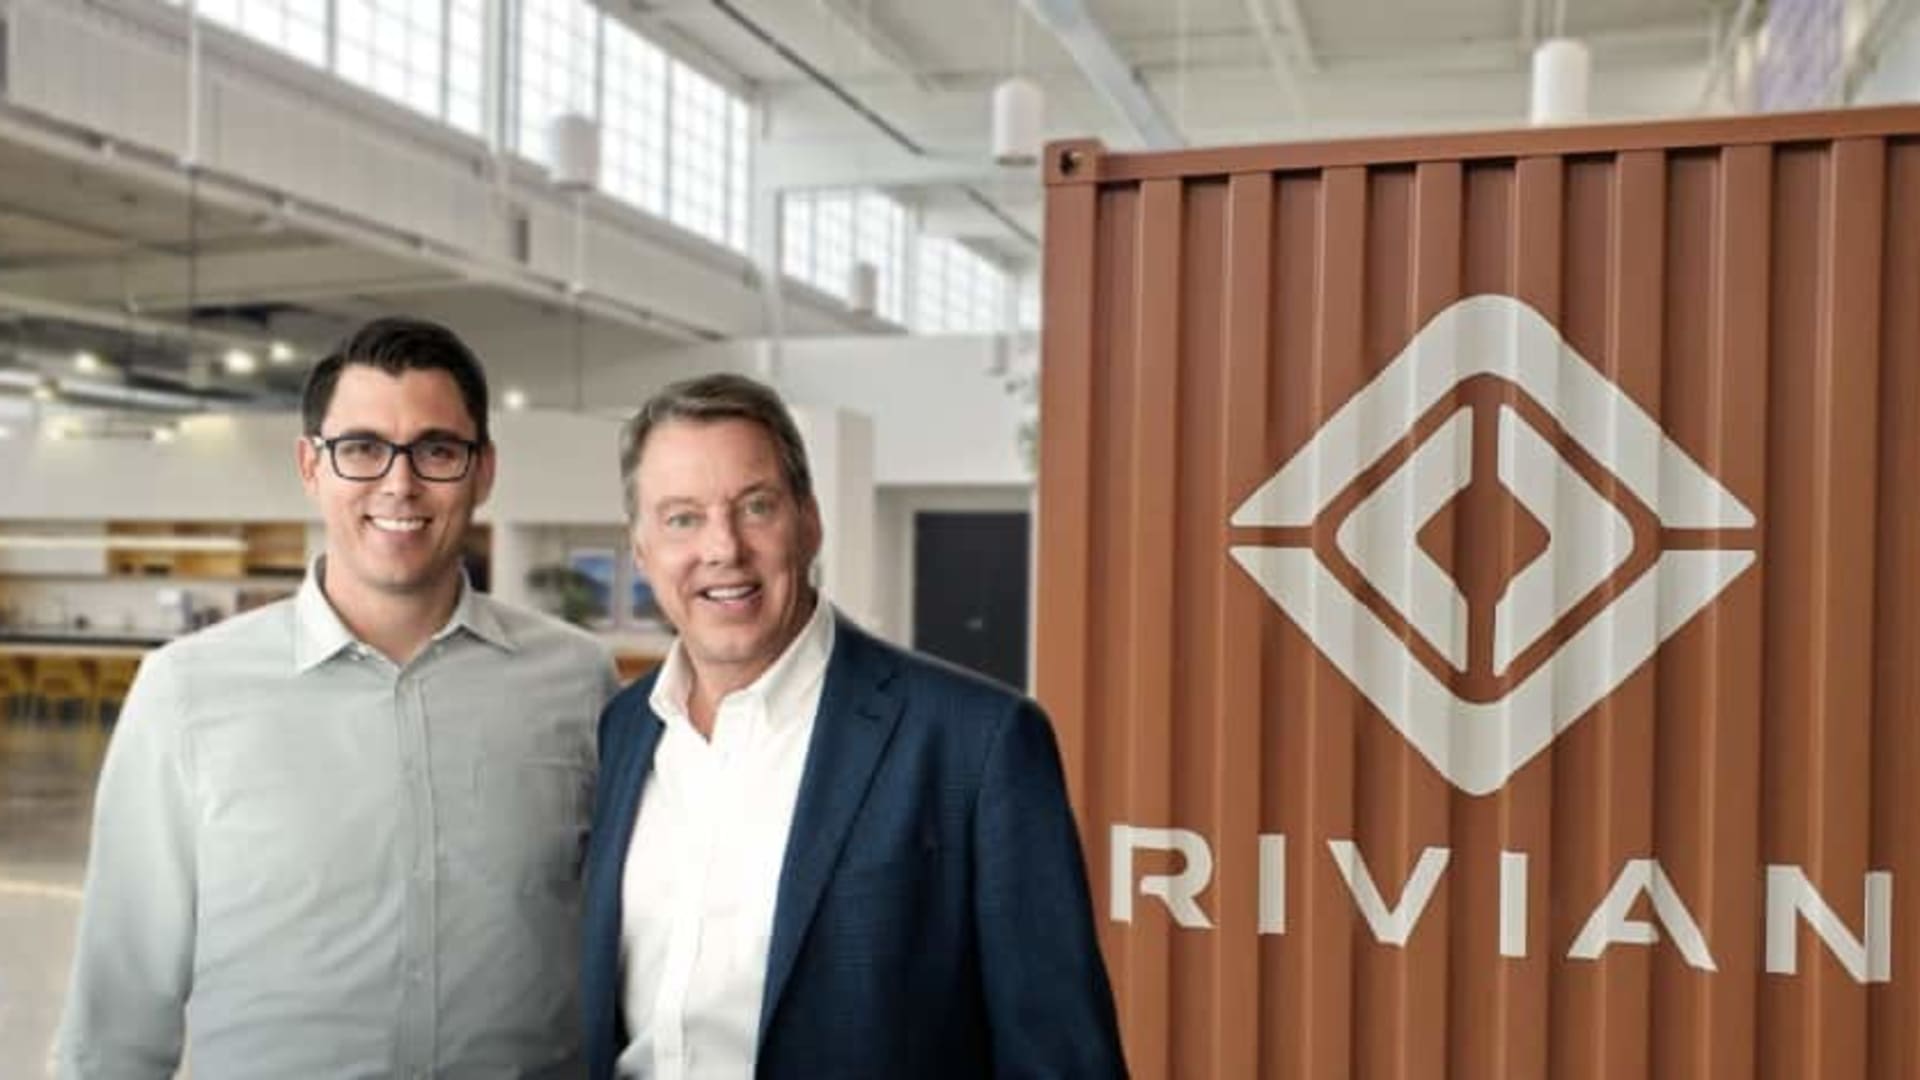 Ford sold 91 million shares of EV startup Rivian last year